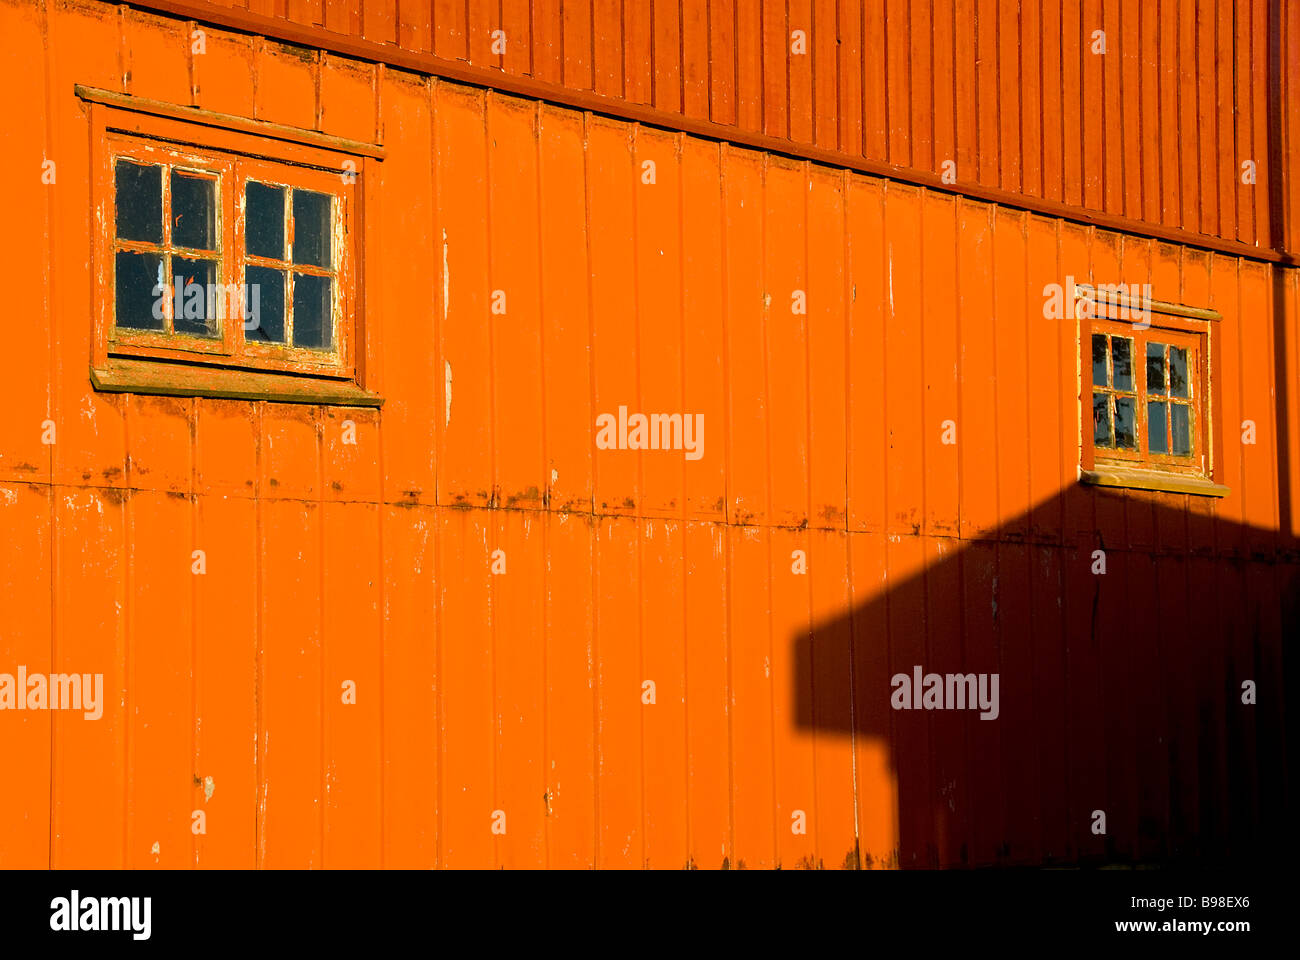 Old wooden ware houses painted red Jutland Denmark Stock Photo